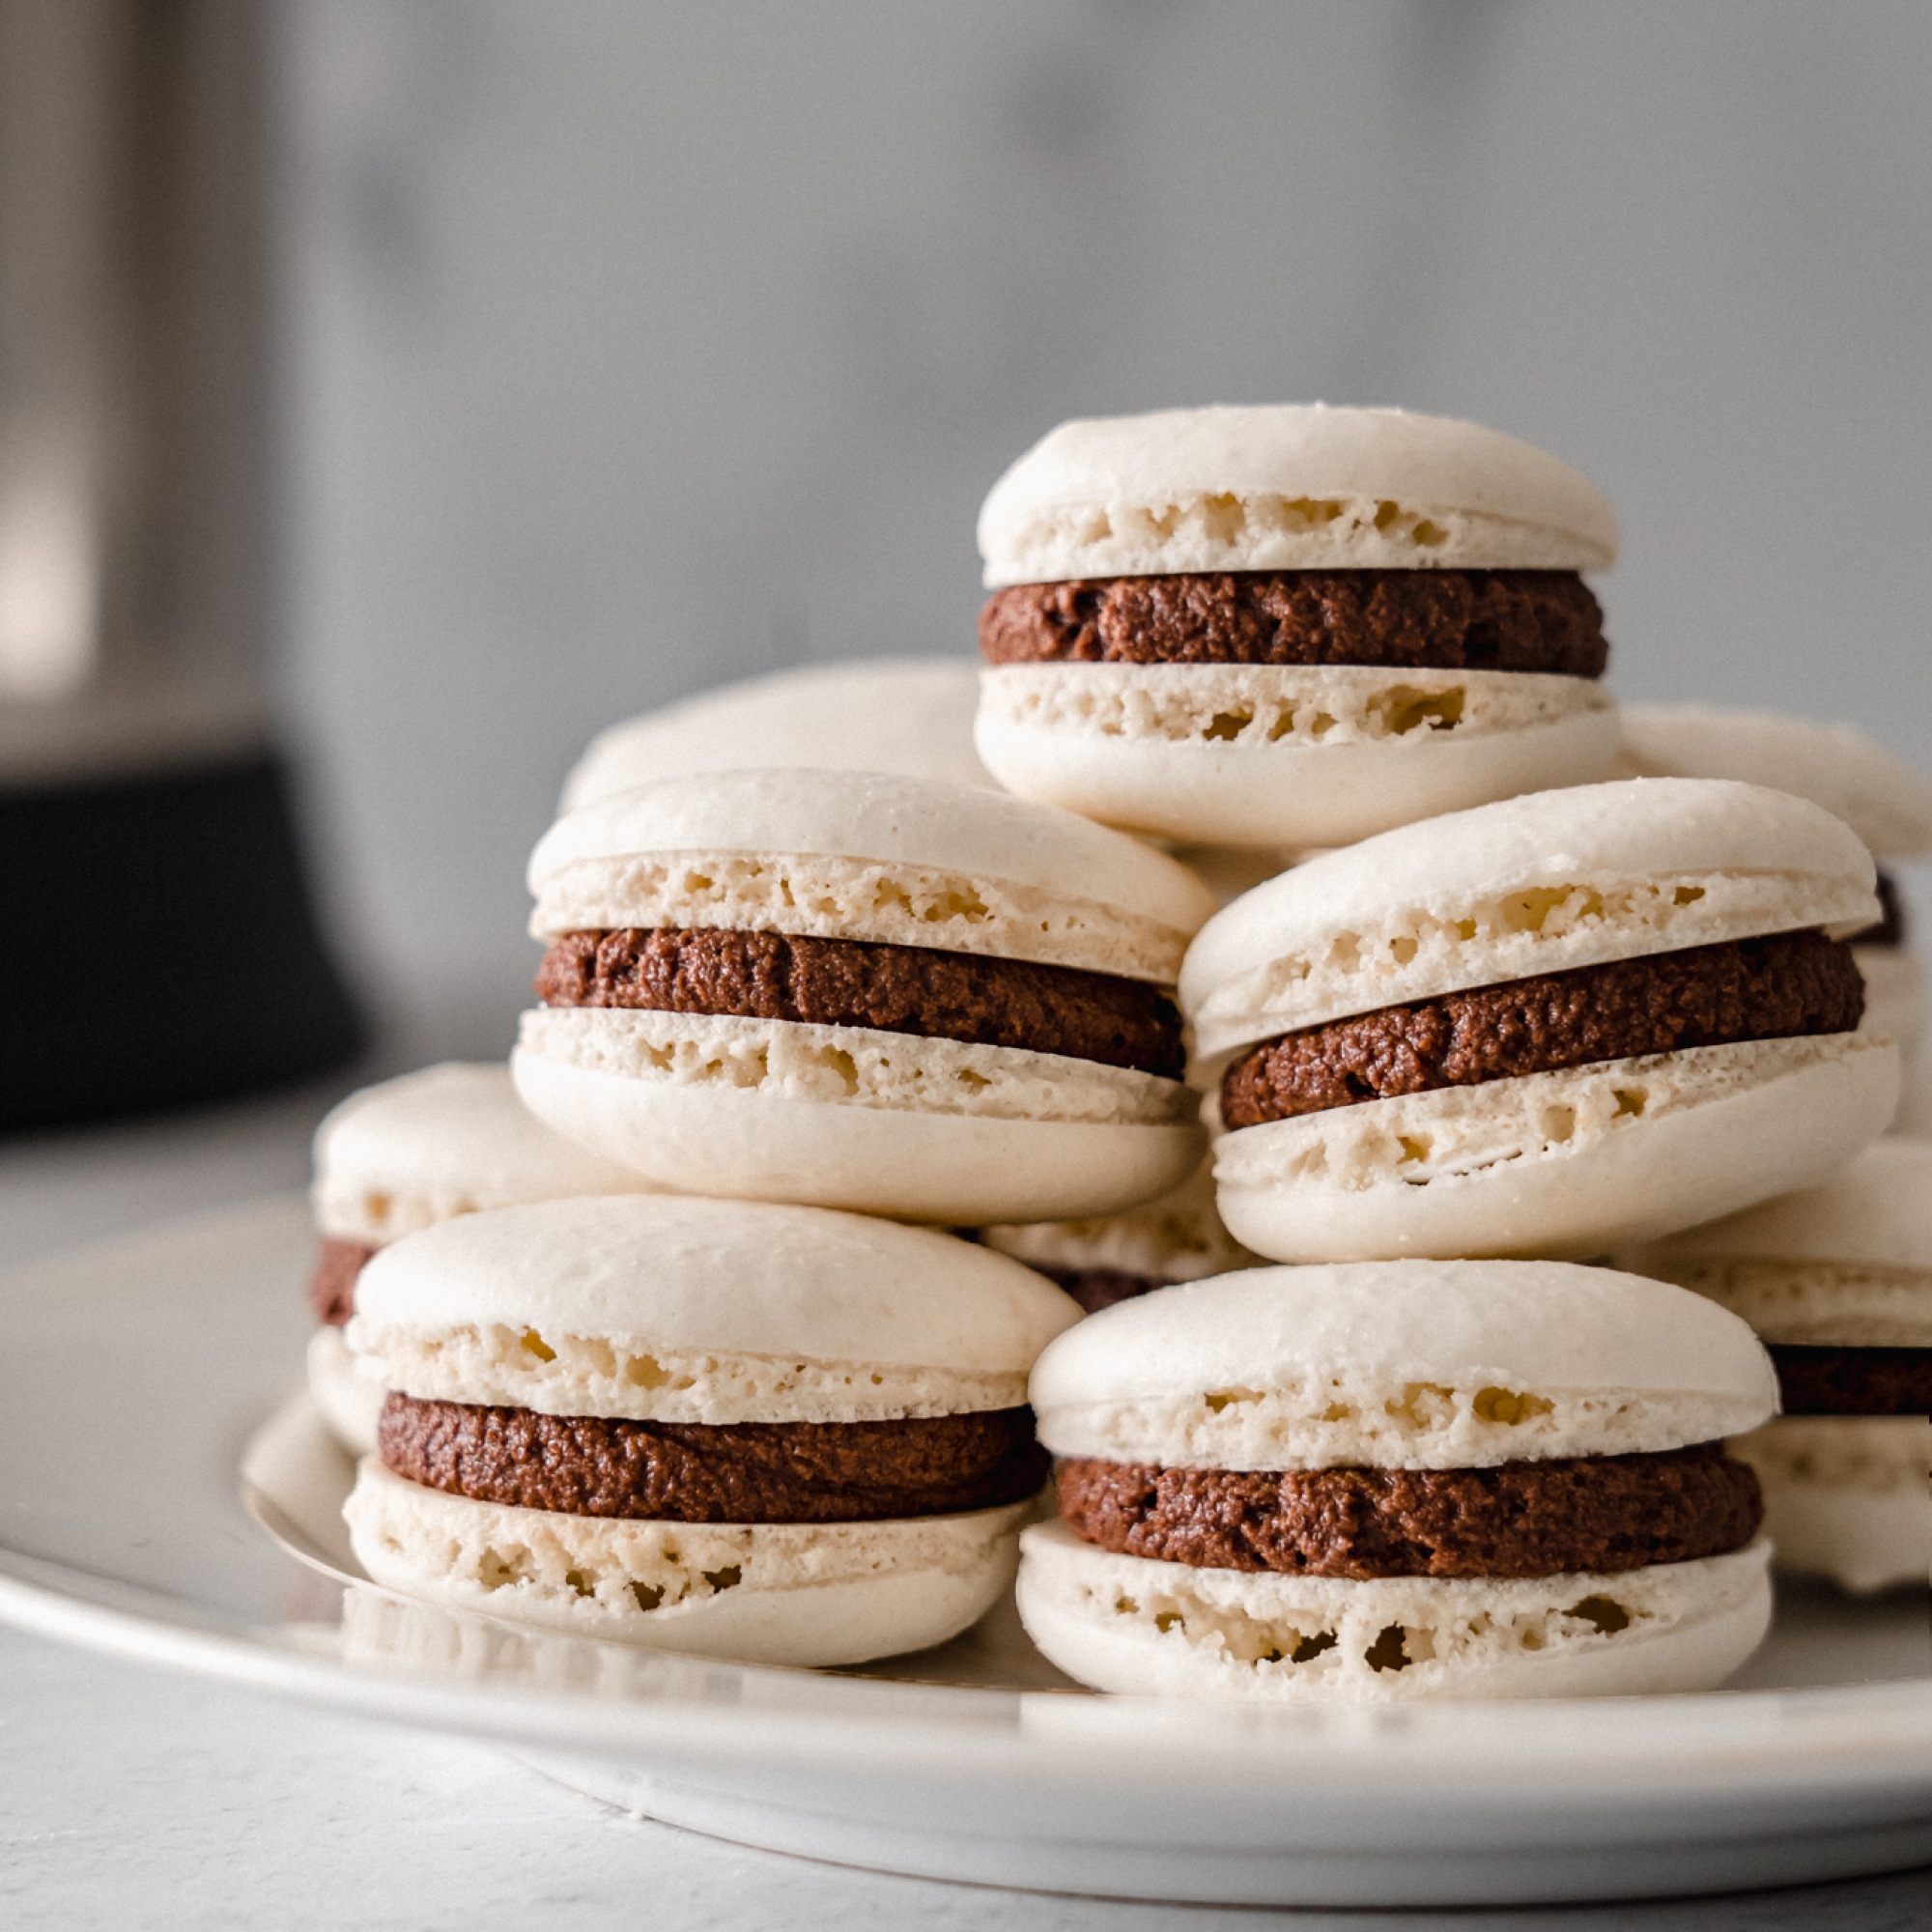 Enjoy these beautiful and delicious French Macarons. Featuring almond milk made in your Almond Cow. A classic delicate sandwich cookie filled with a decadent chocolate buttercream filling. 